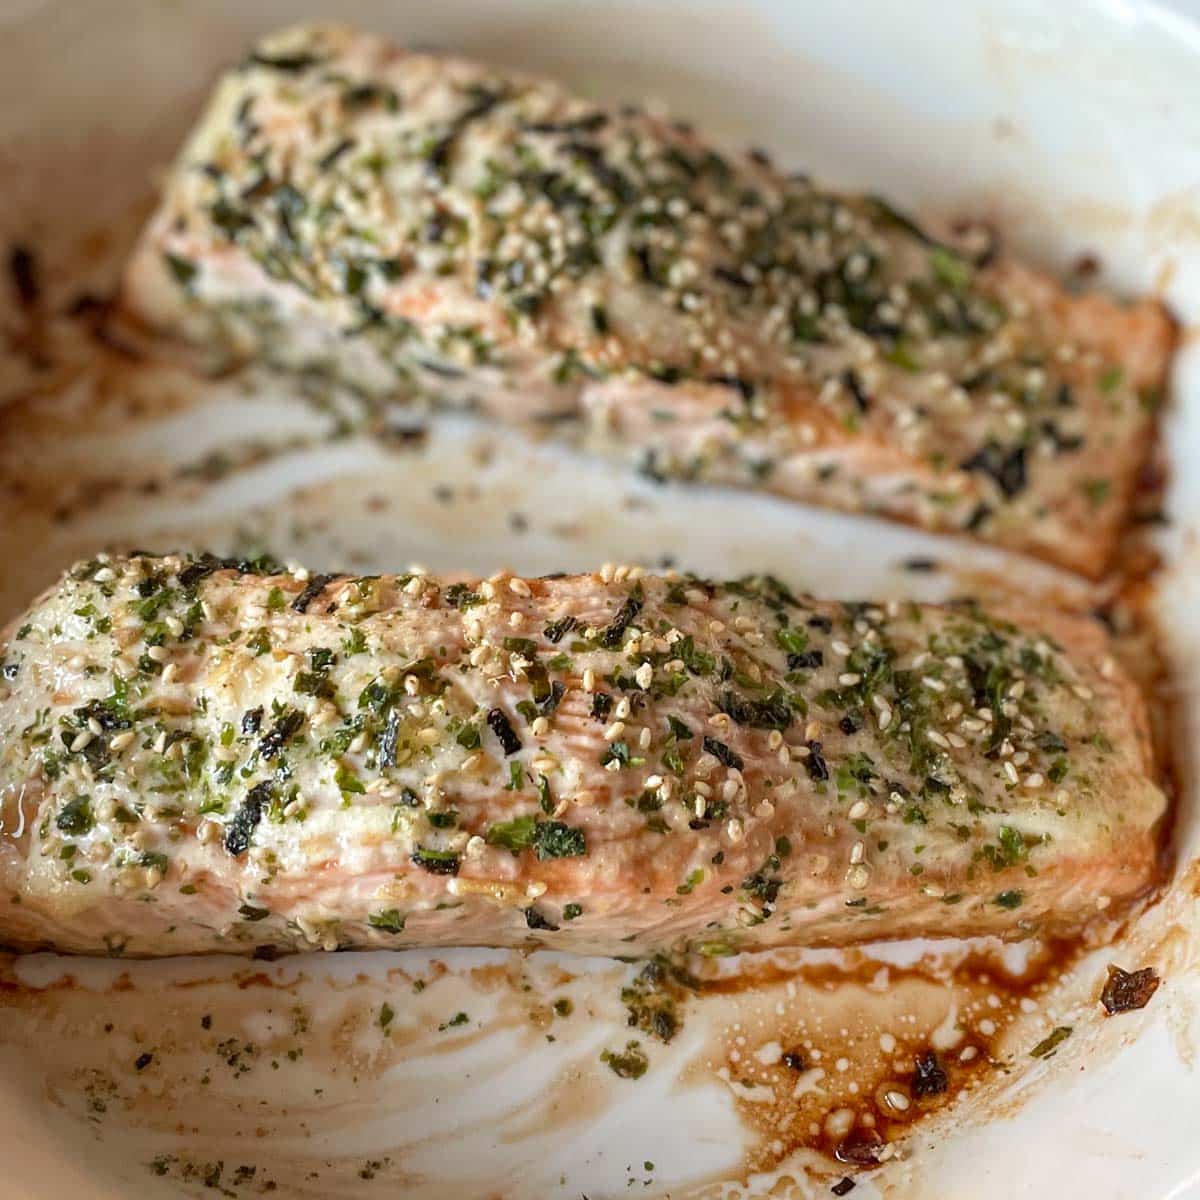 Baked salmon fillets coated in mayonnaise and furikake sit in a white baking dish.